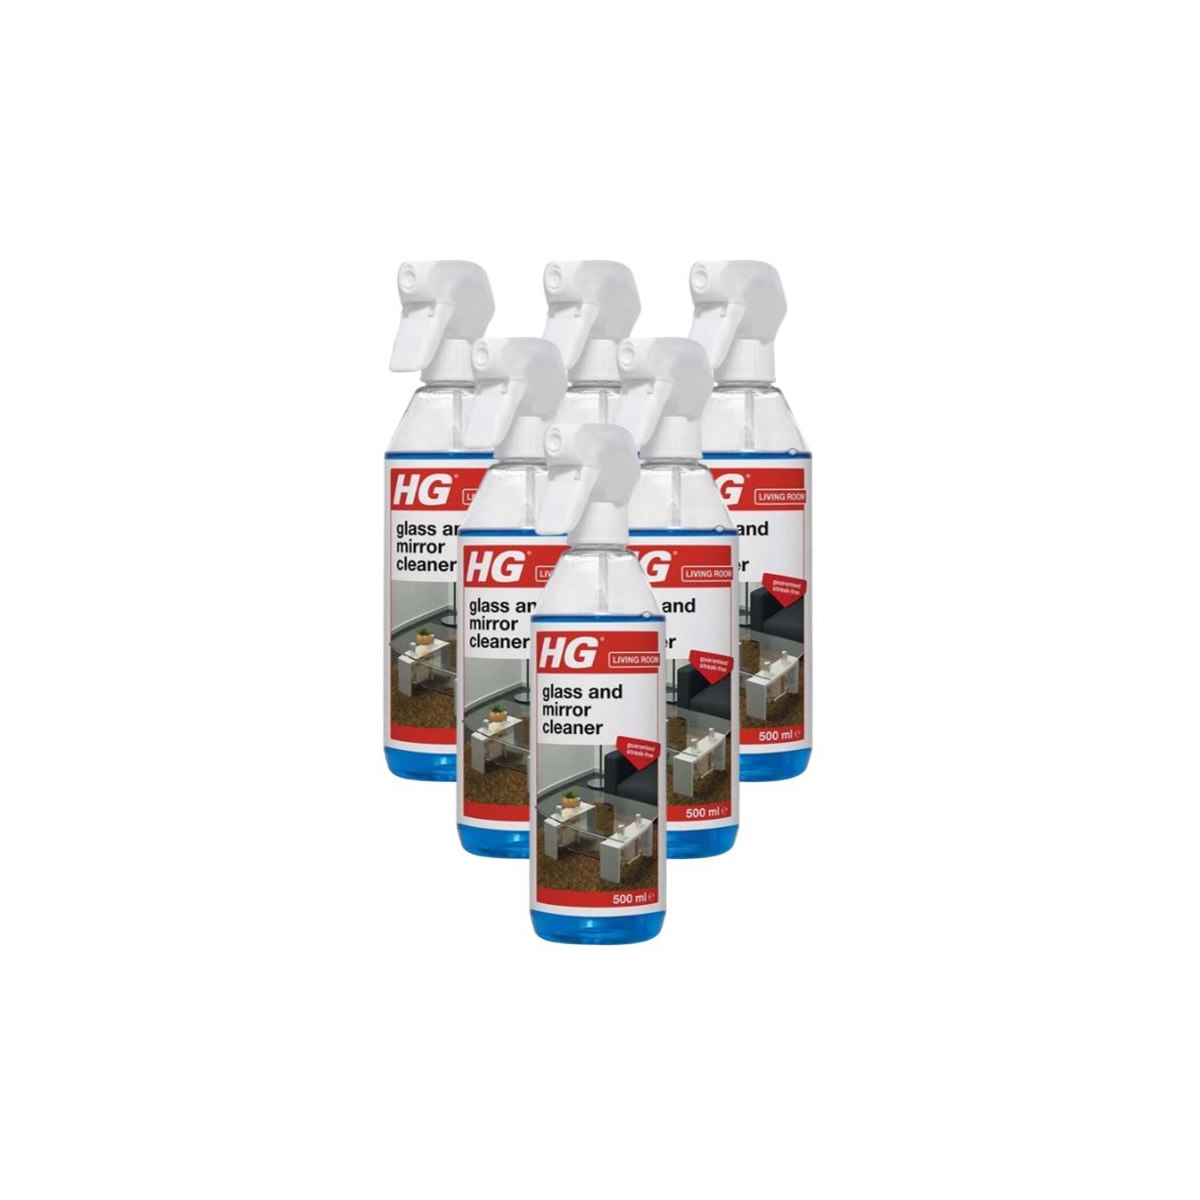 Case of 6 x HG Glass and Mirror Cleaner 500ml